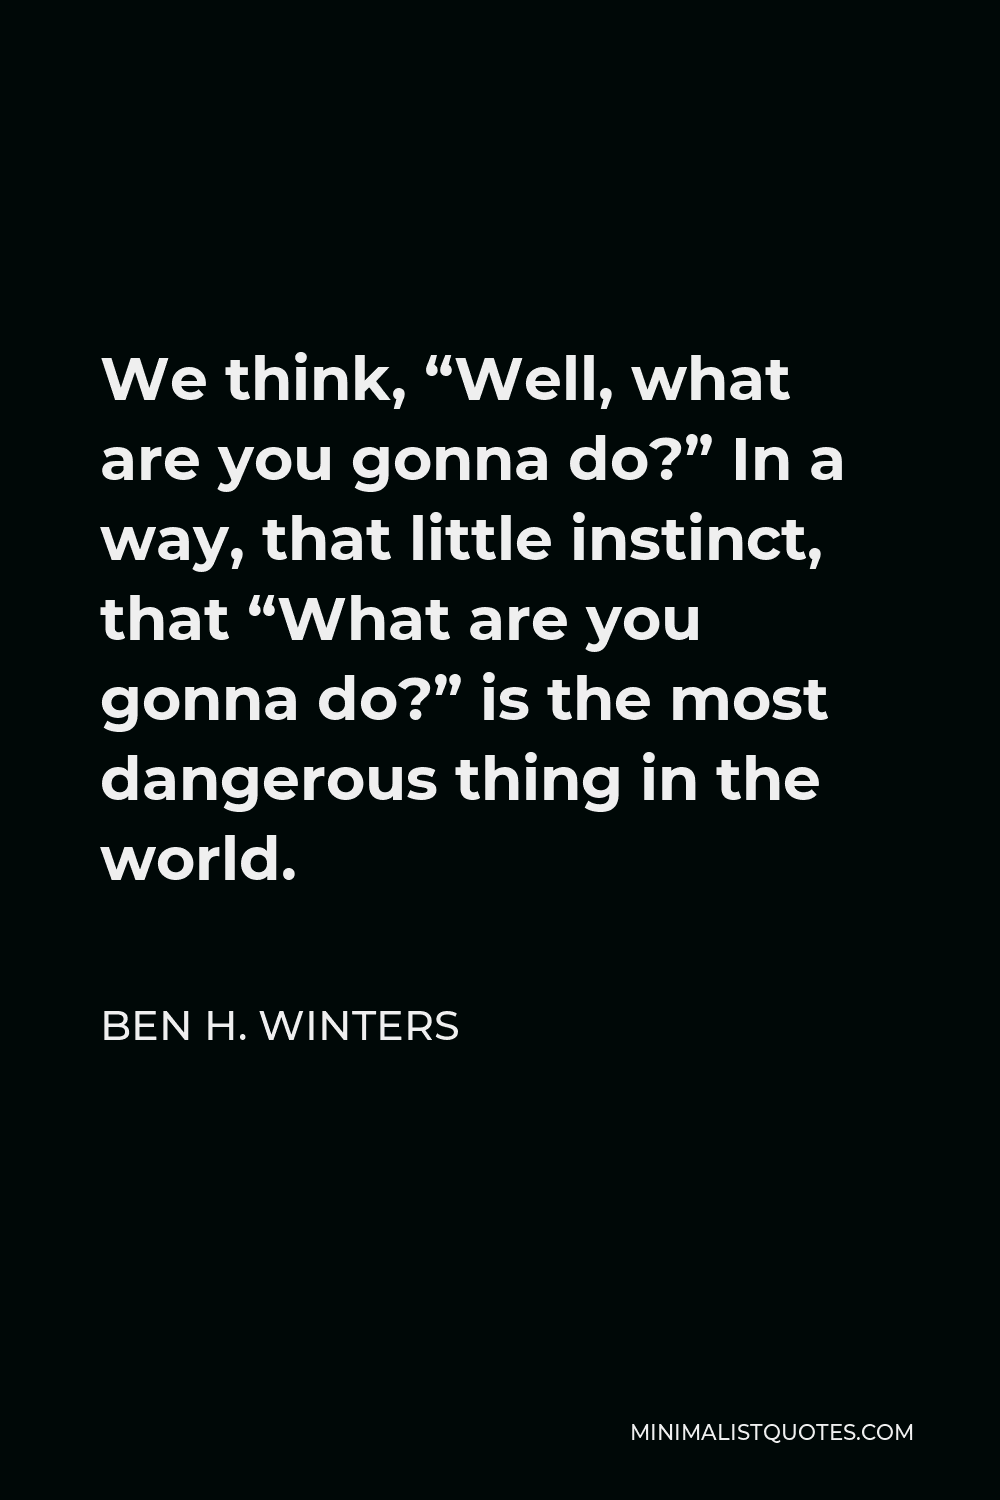 Ben H. Winters Quote - We think, “Well, what are you gonna do?” In a way, that little instinct, that “What are you gonna do?” is the most dangerous thing in the world.